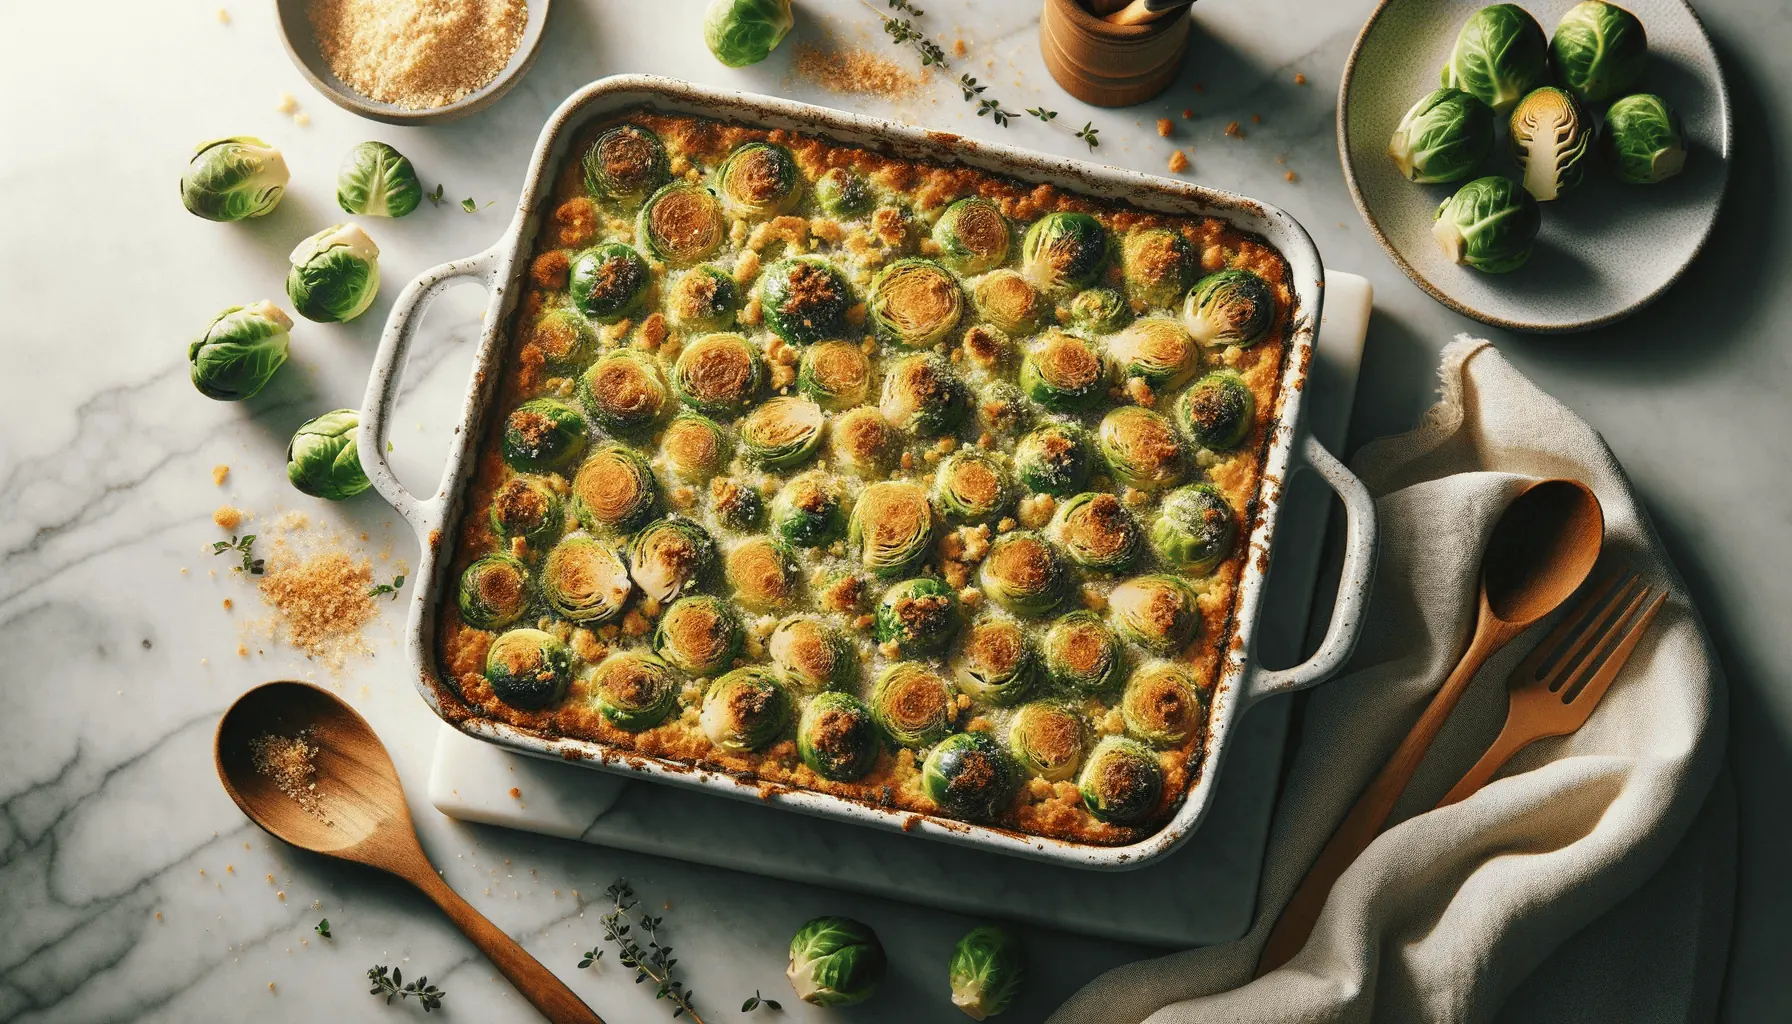 Vegan Brussels sprouts casserole recipe, ready to serve